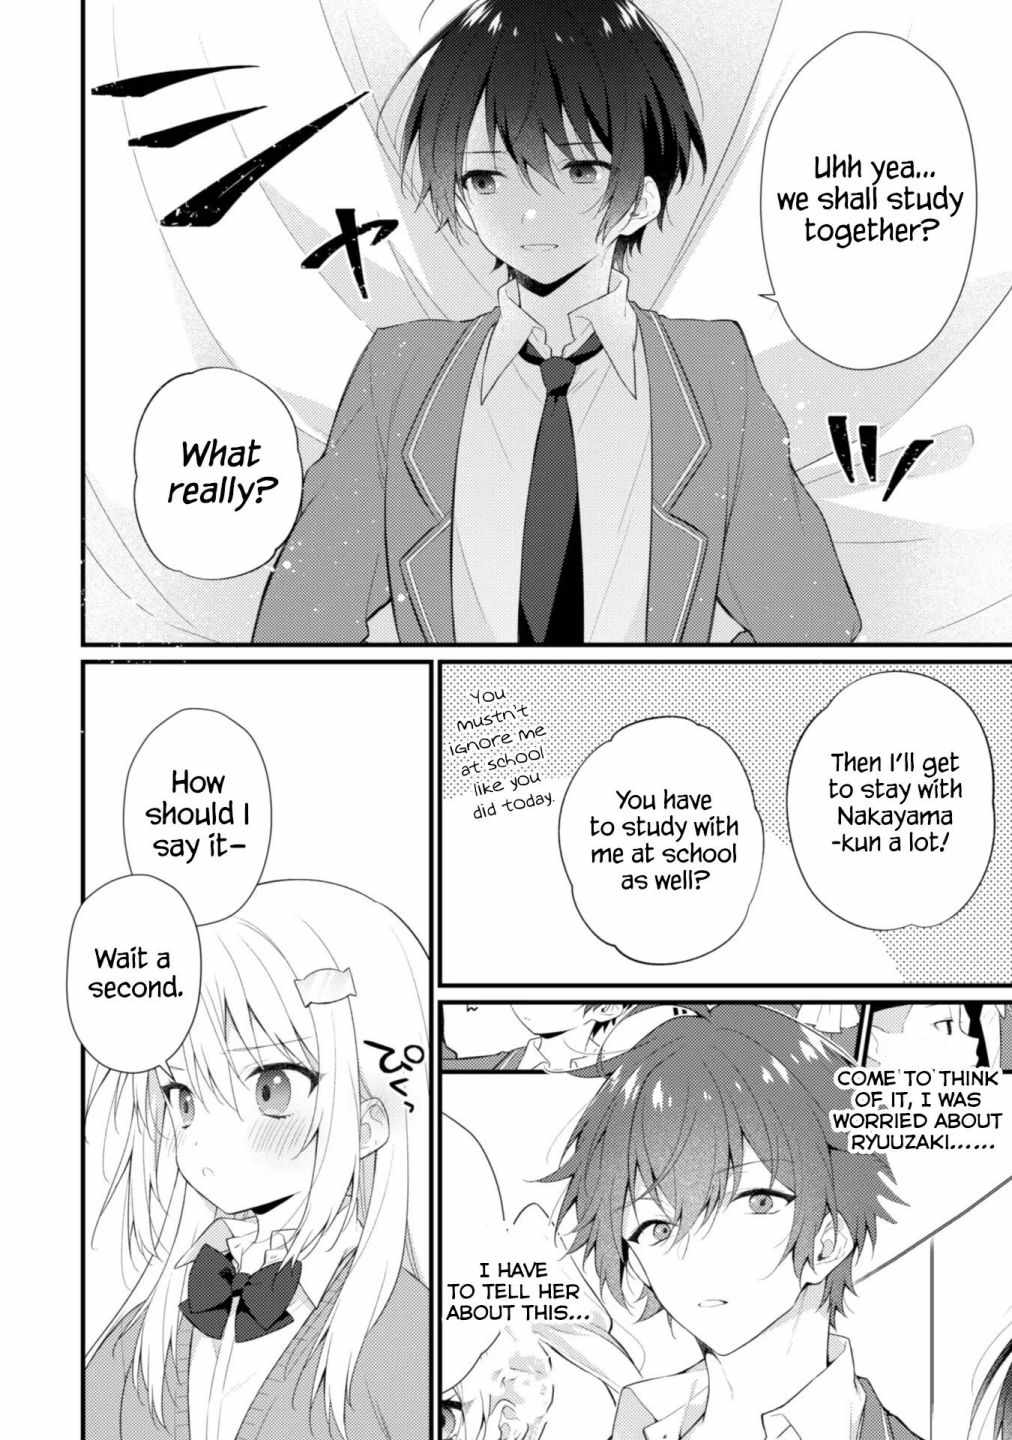 Shimotsuki-san Likes the Mob ~This Shy Girl is Only Sweet Towards Me~ Chapter 5-eng-li - Page 16